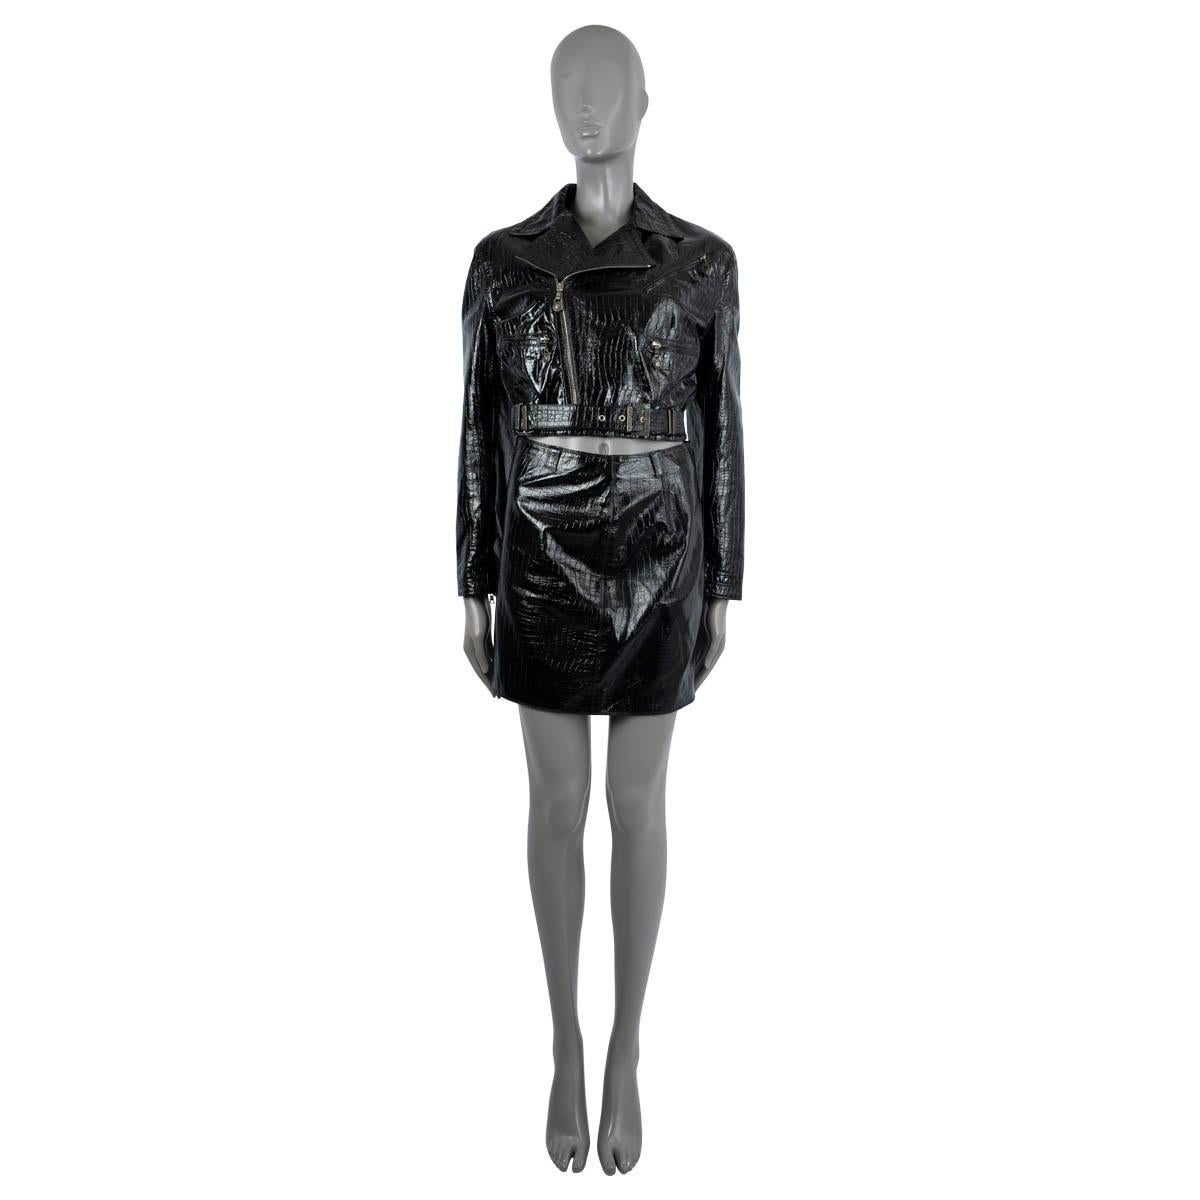 100% authentic Gianni Versace biker mini skirt suit in black crocodile embossed shiny leather. The jacket features three zip pockets on the front, a waist belt and closes with an asymmetric zipper. Lined in rayon. The mini skirt closes with a zipper